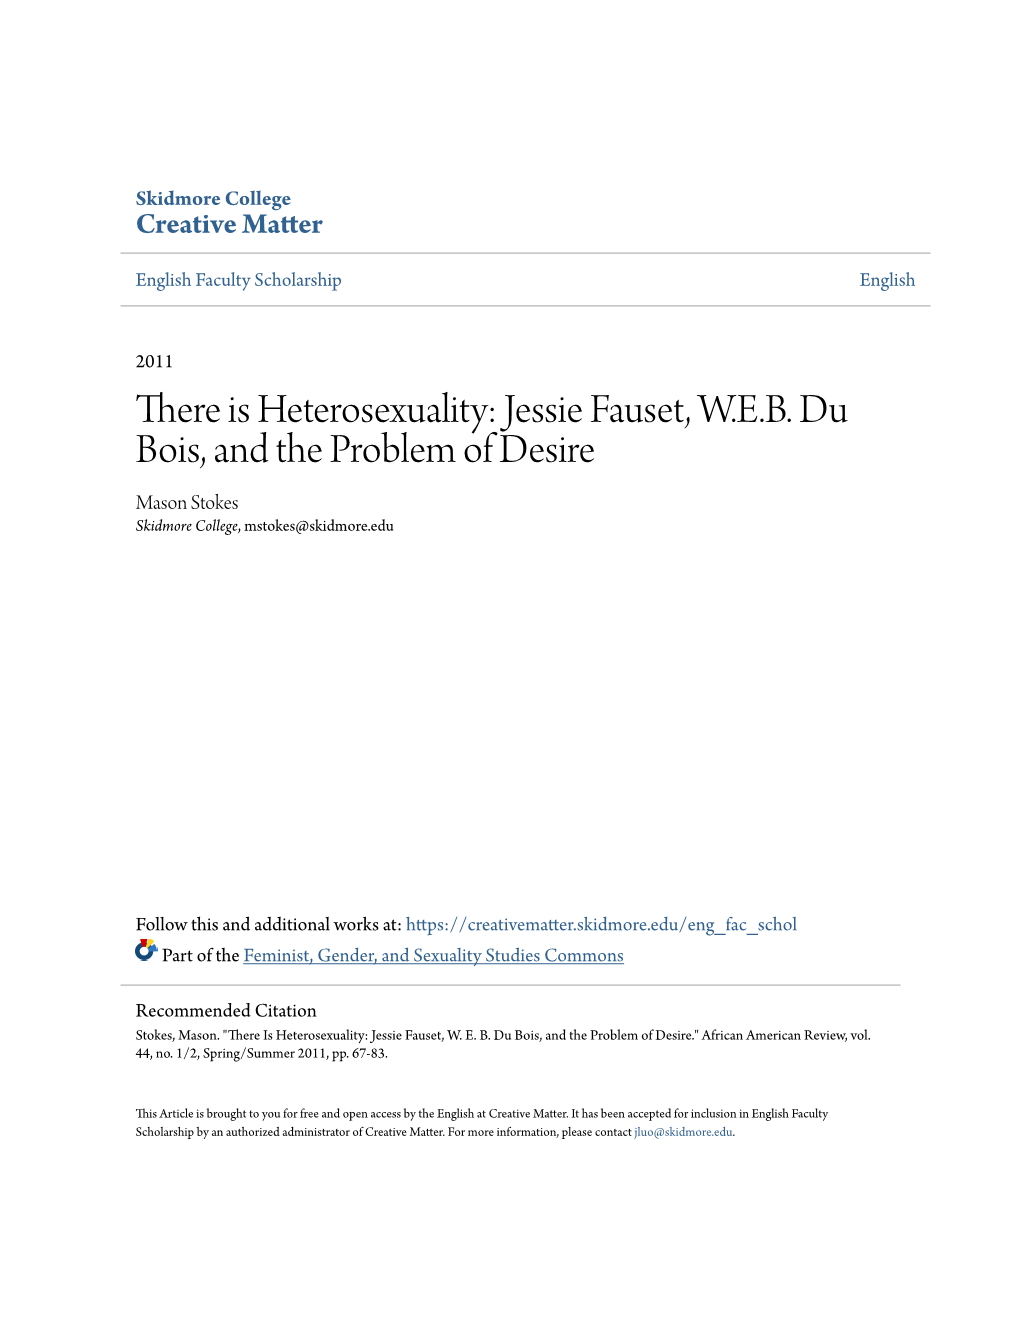 There Is Heterosexuality: Jessie Fauset, W.E.B. Du Bois, and the Problem of Desire Mason Stokes Skidmore College, Mstokes@Skidmore.Edu